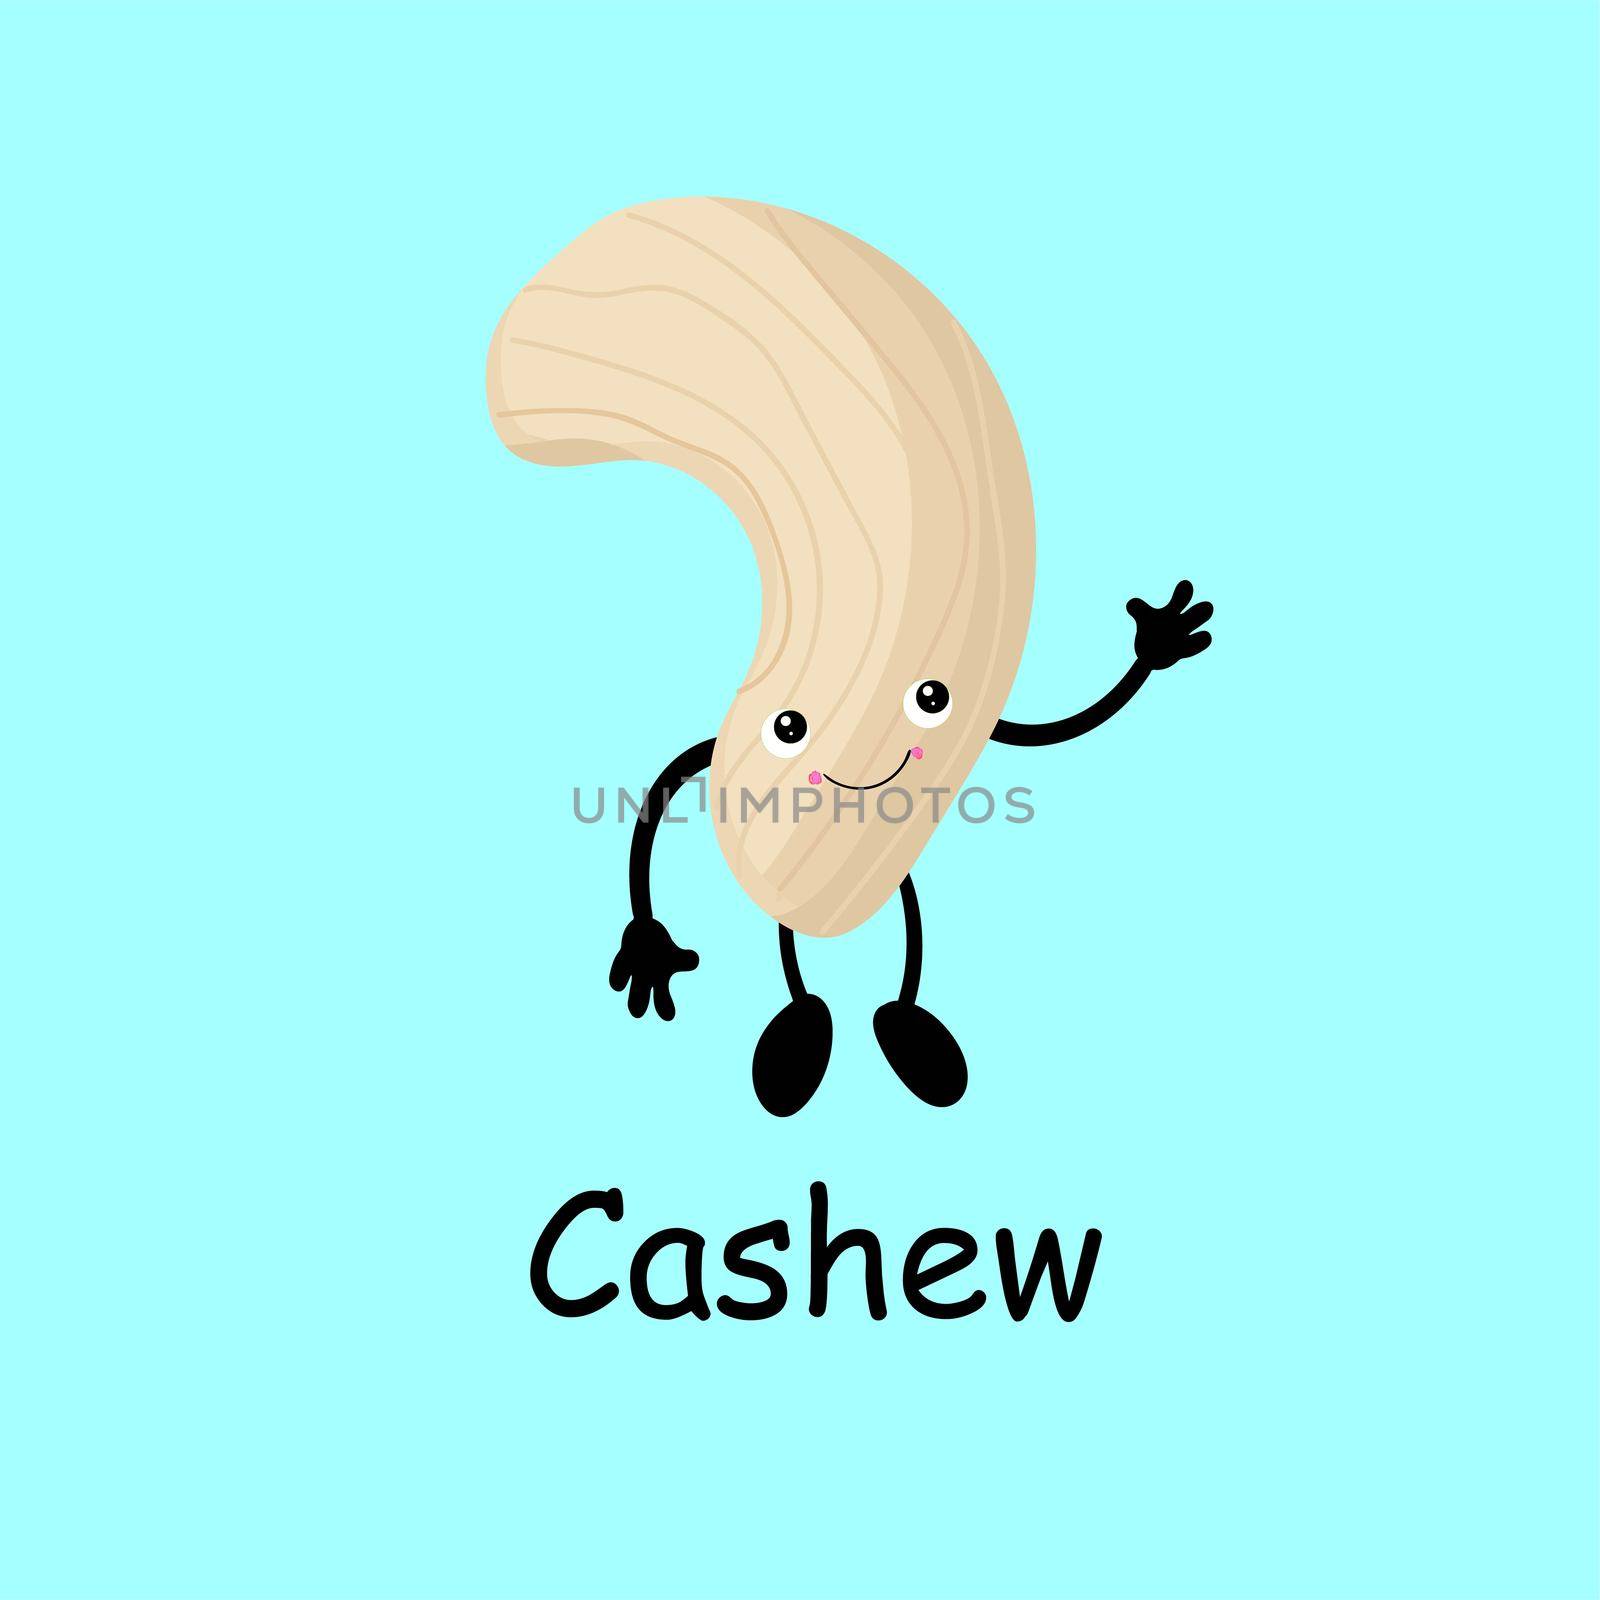 Cashew. Cute nut character with hands and eyes. Cartoon fruit or vegetable. Useful vegan food